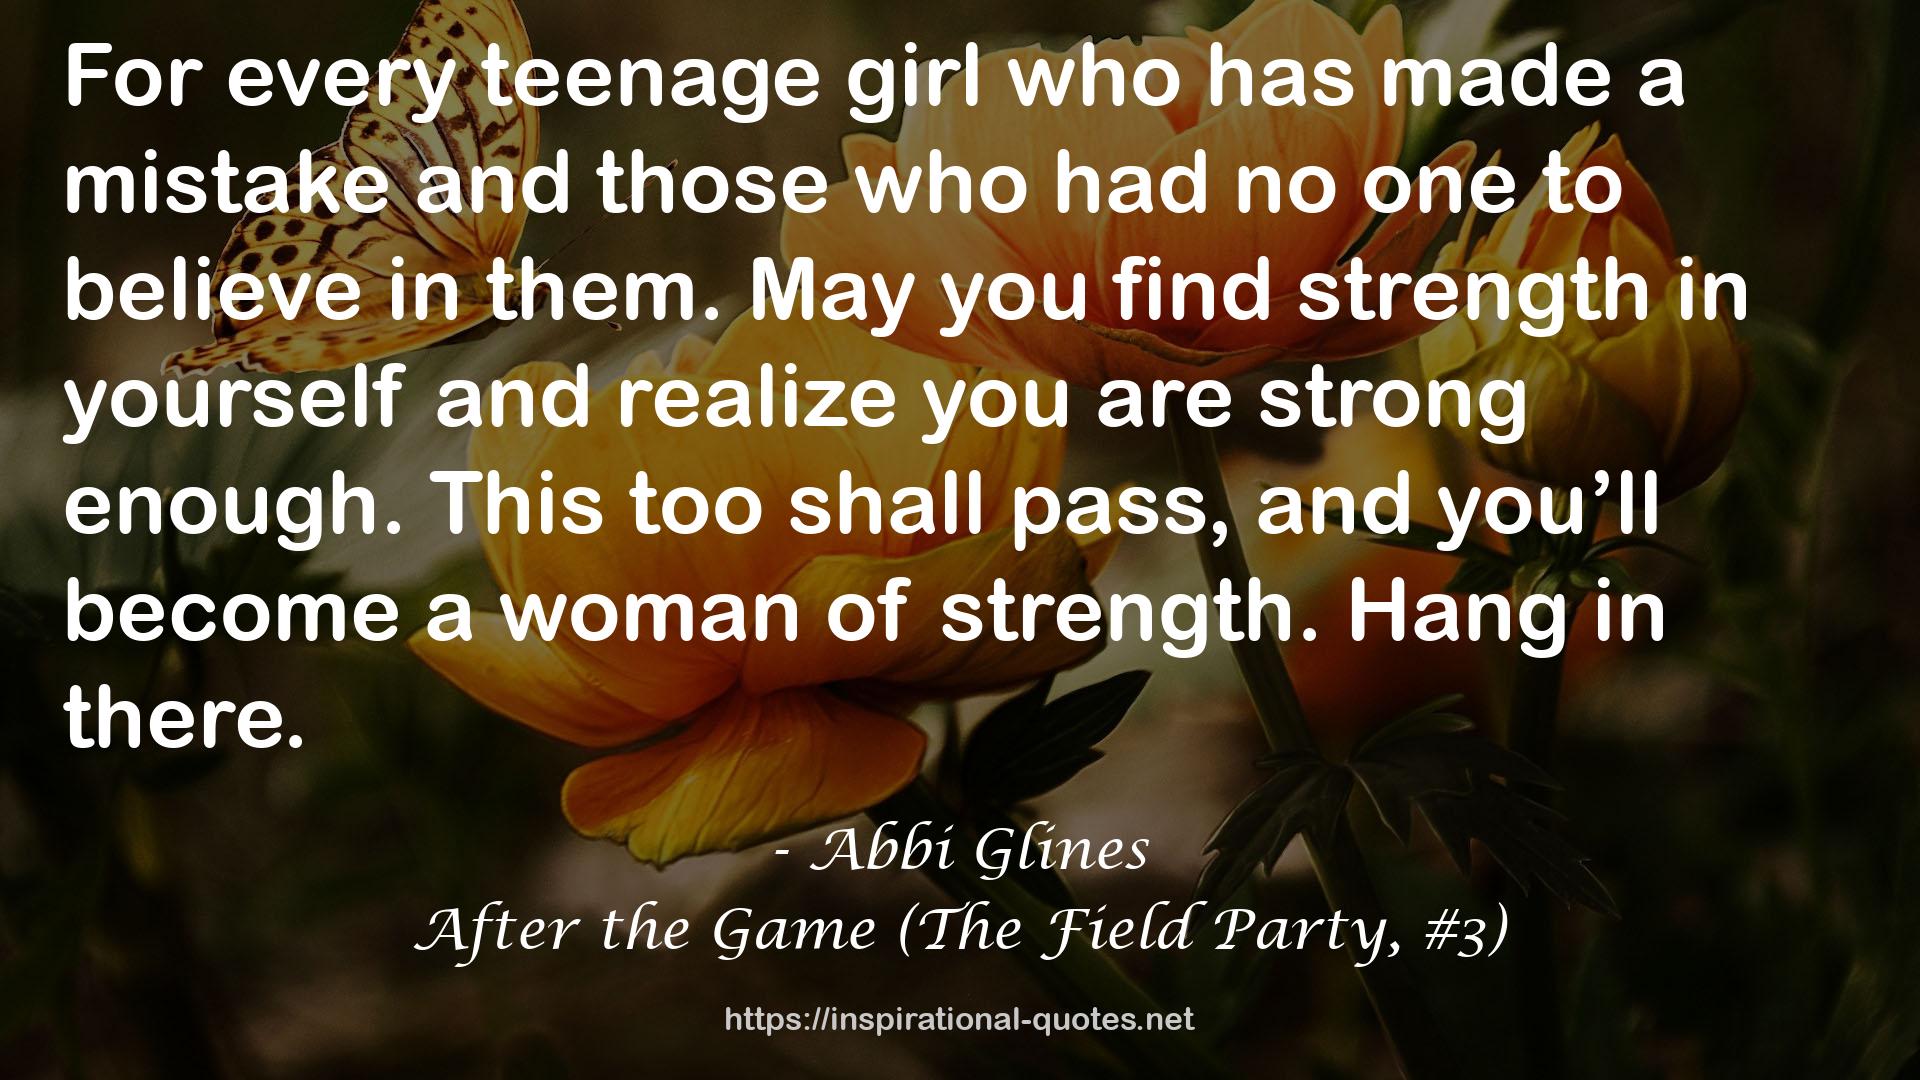 After the Game (The Field Party, #3) QUOTES